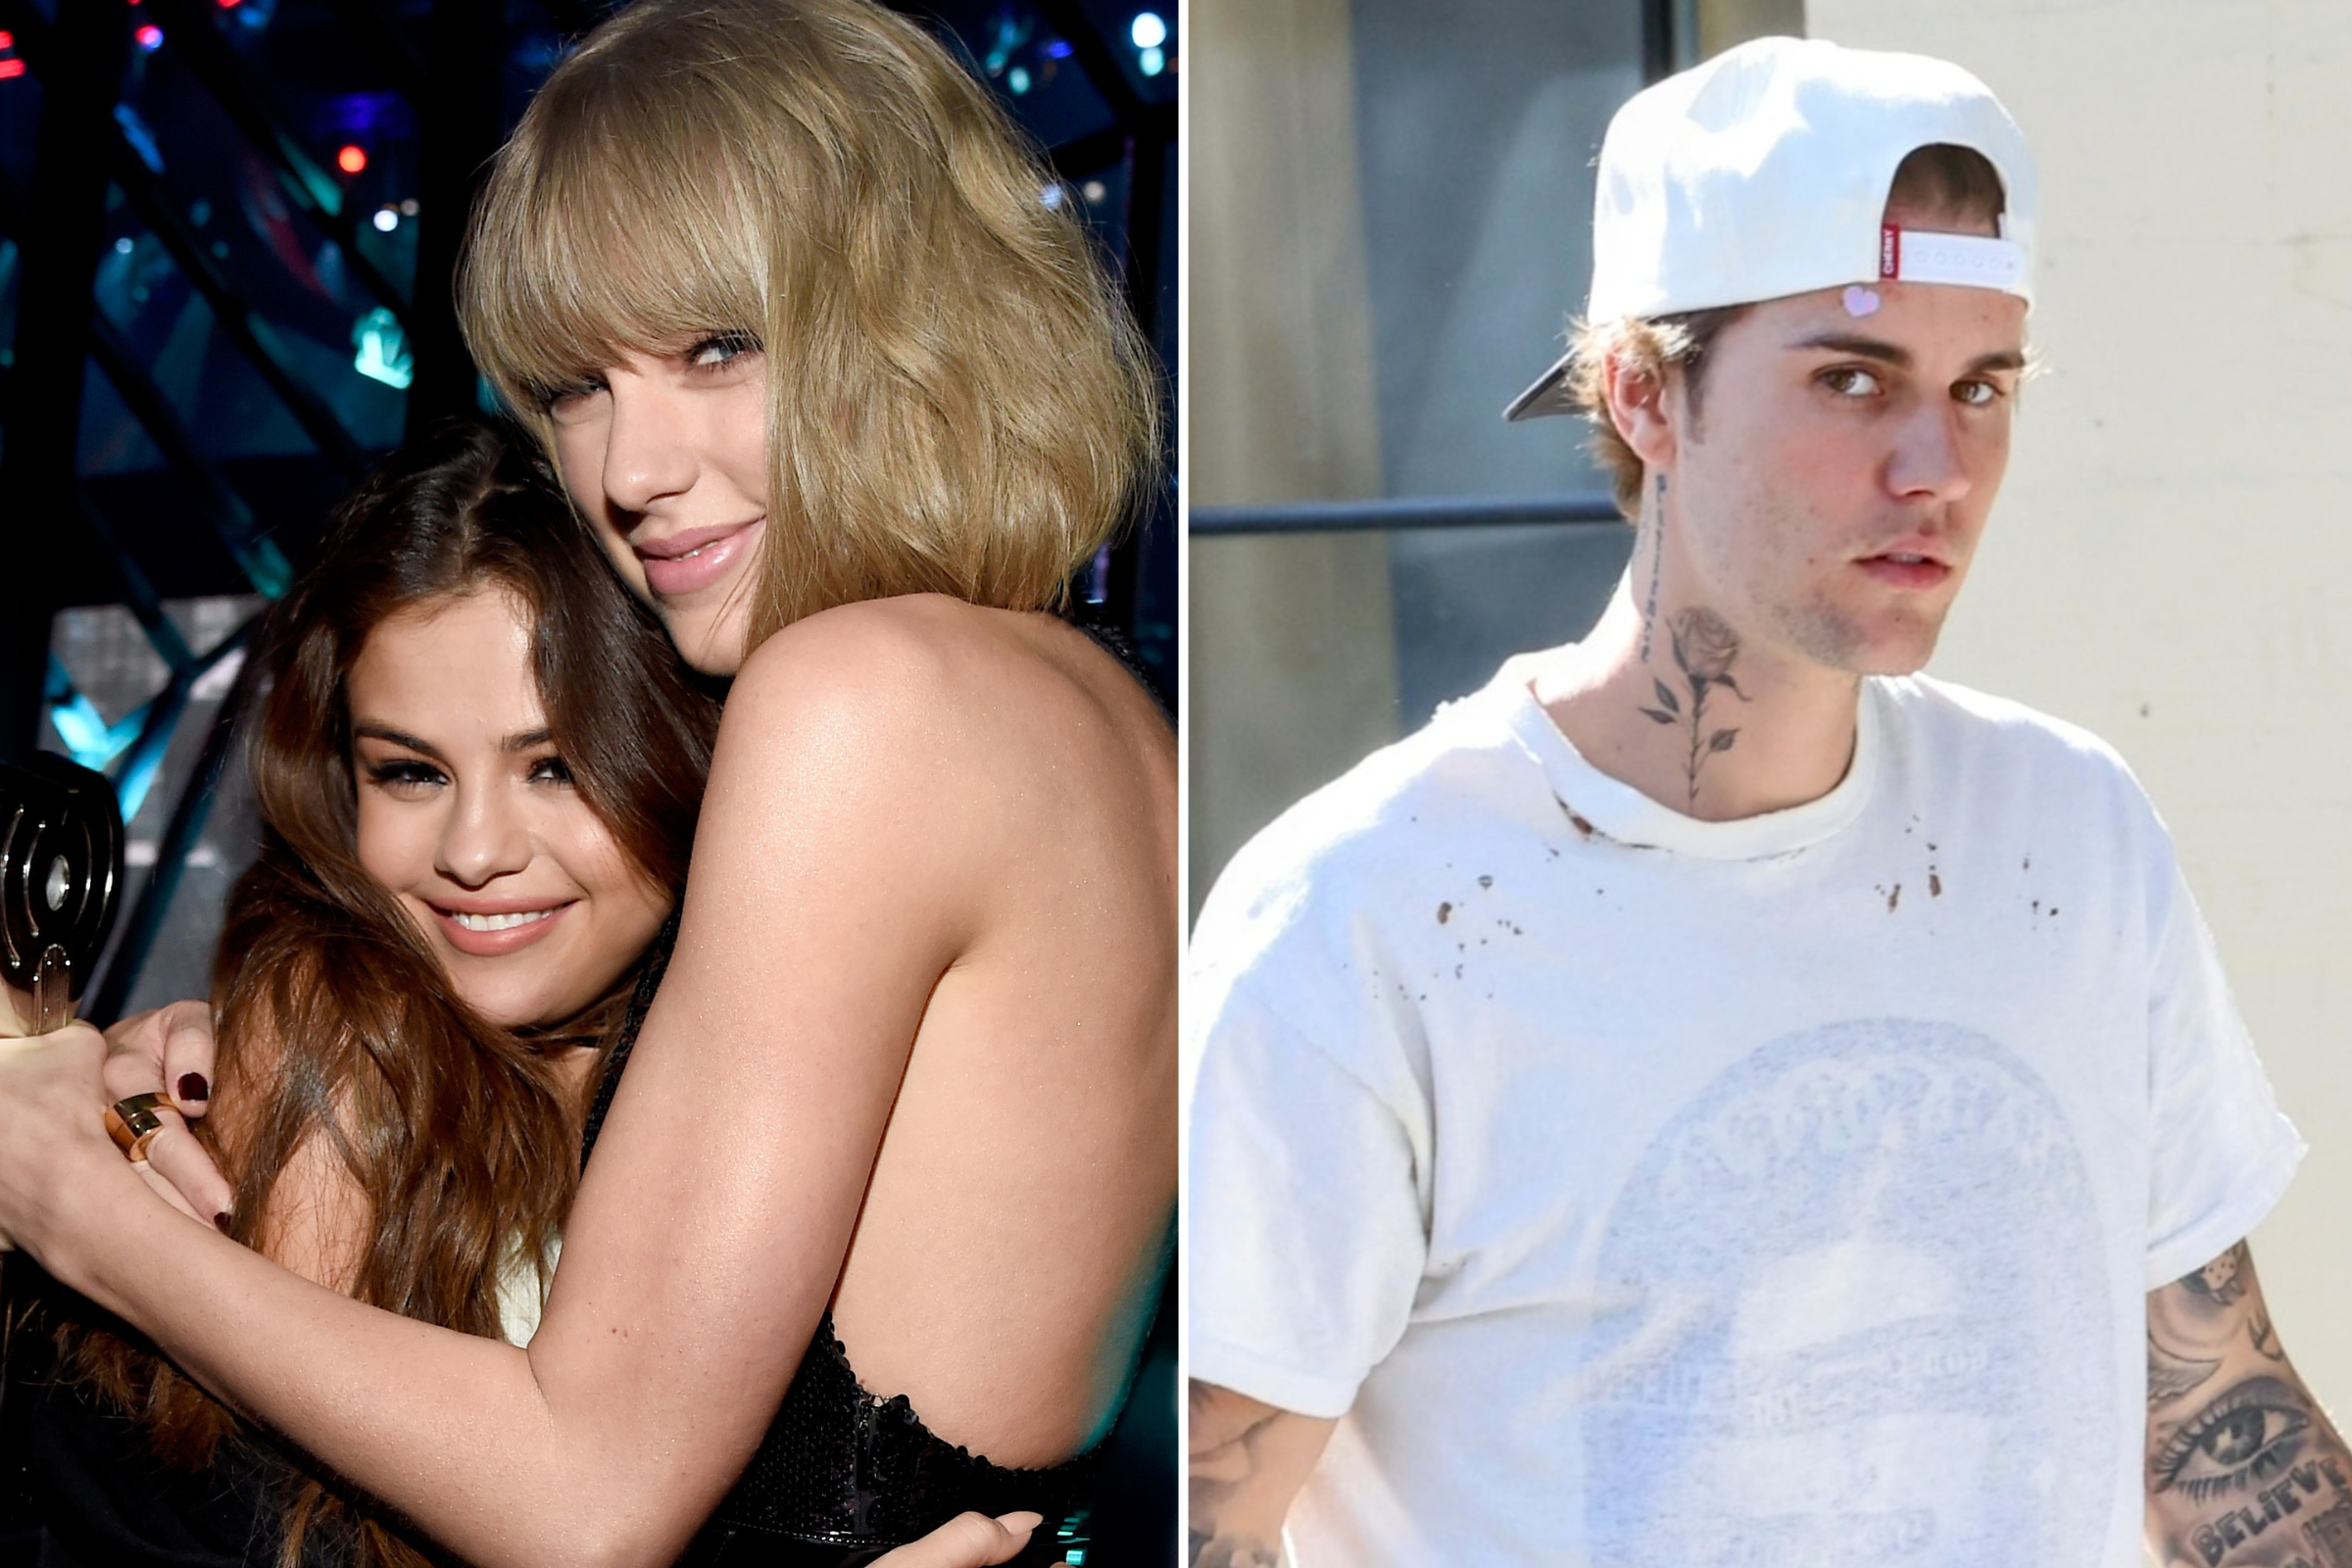 Justin Bieber Just Left the Raunchiest Comment About Hailey